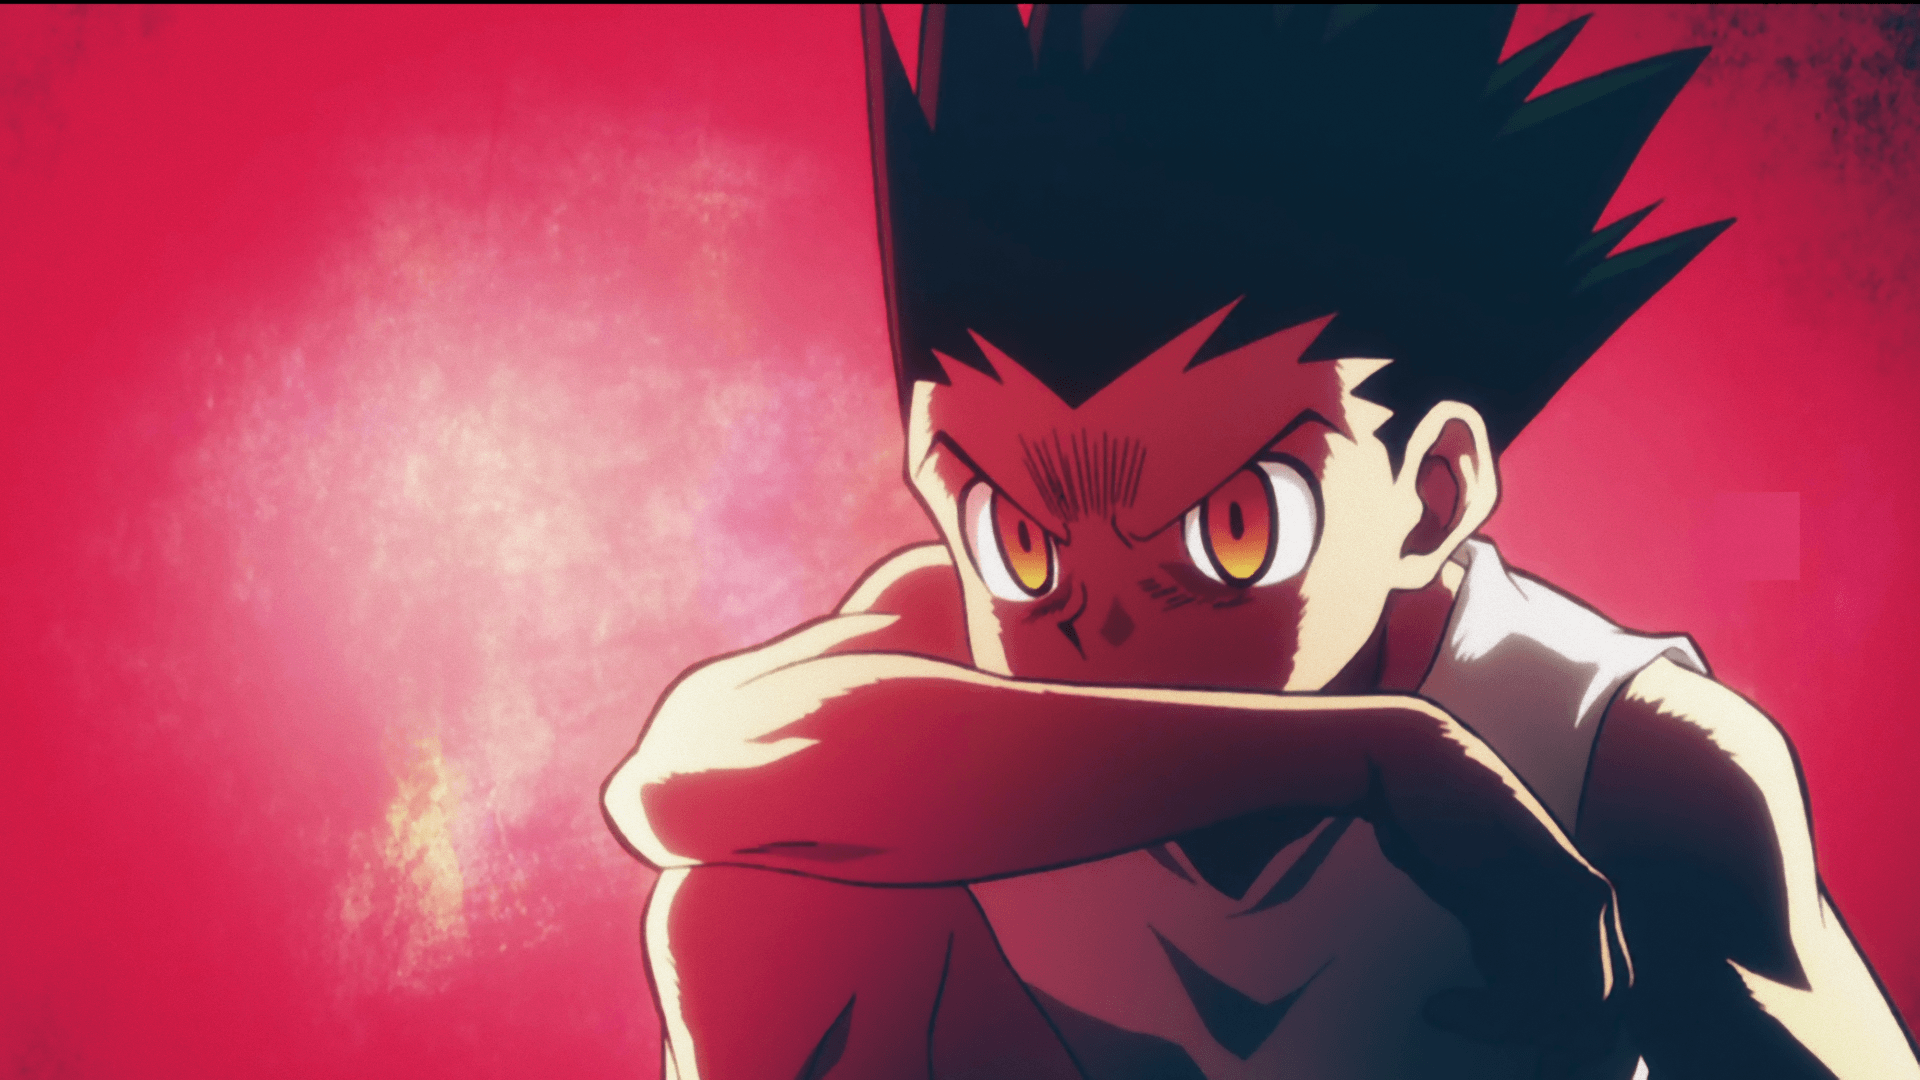 gon's hatred